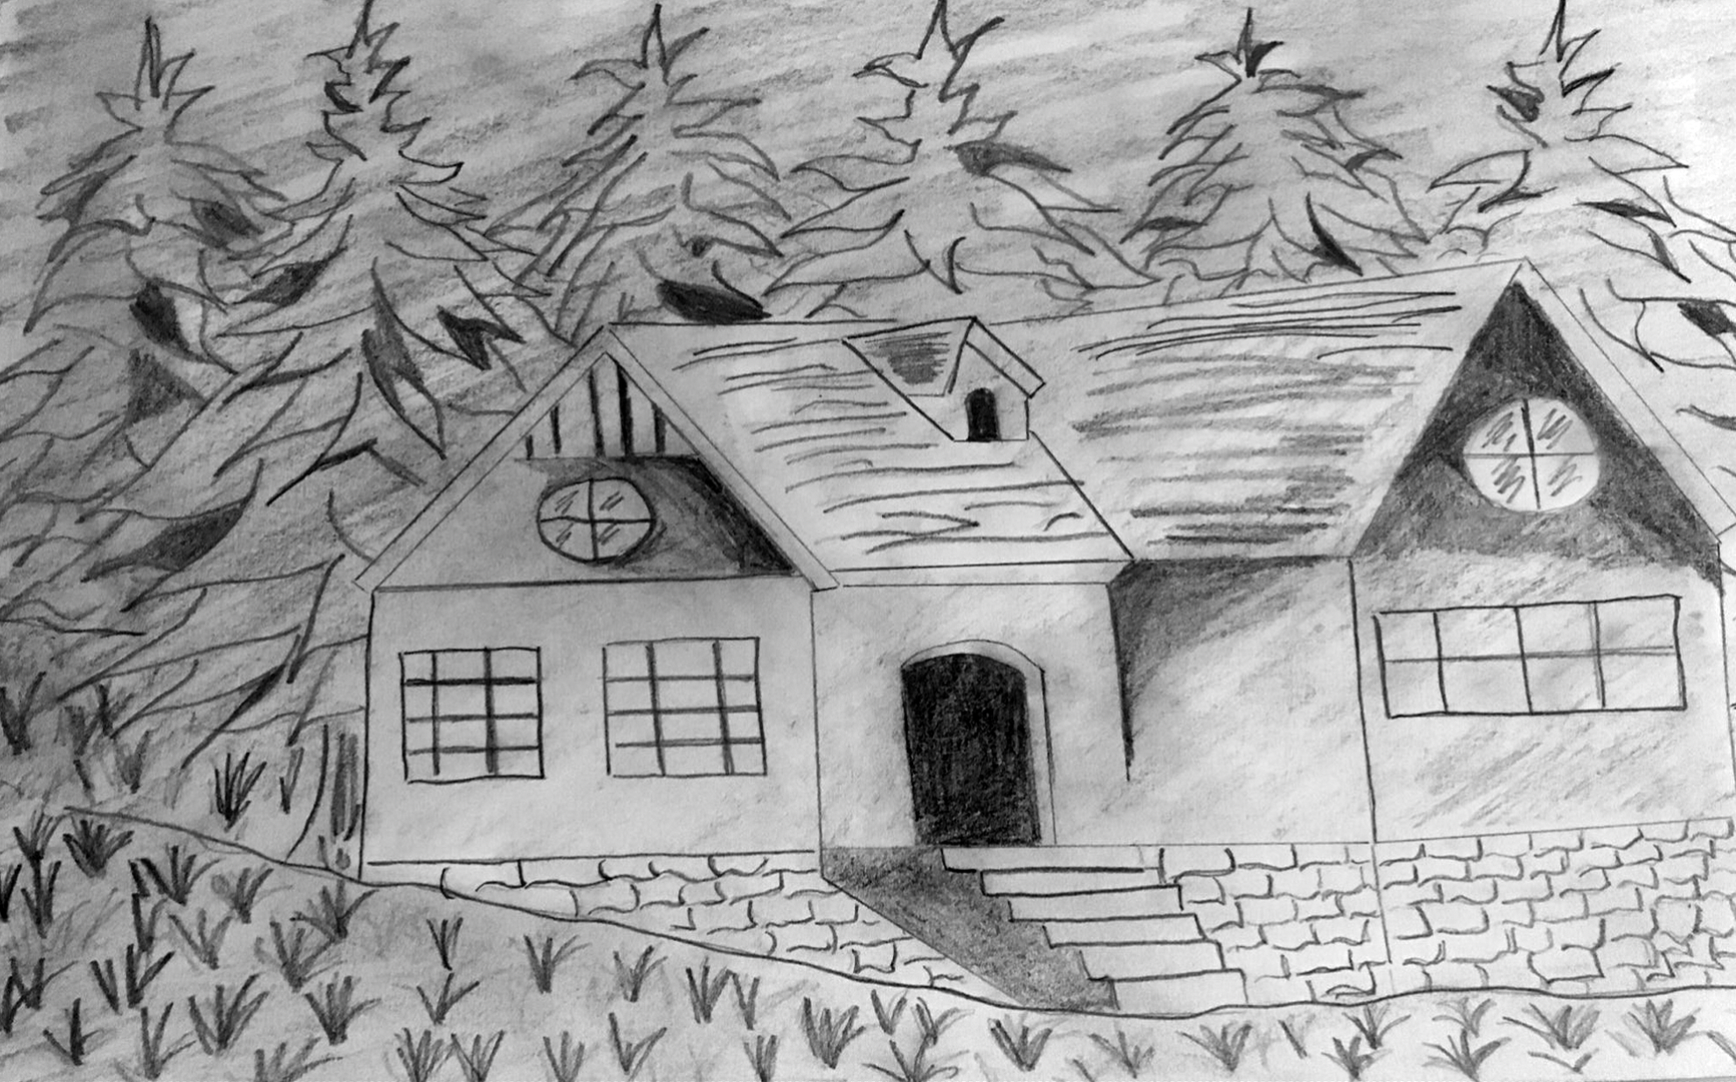 Drawing of house surrounded by garden and forest